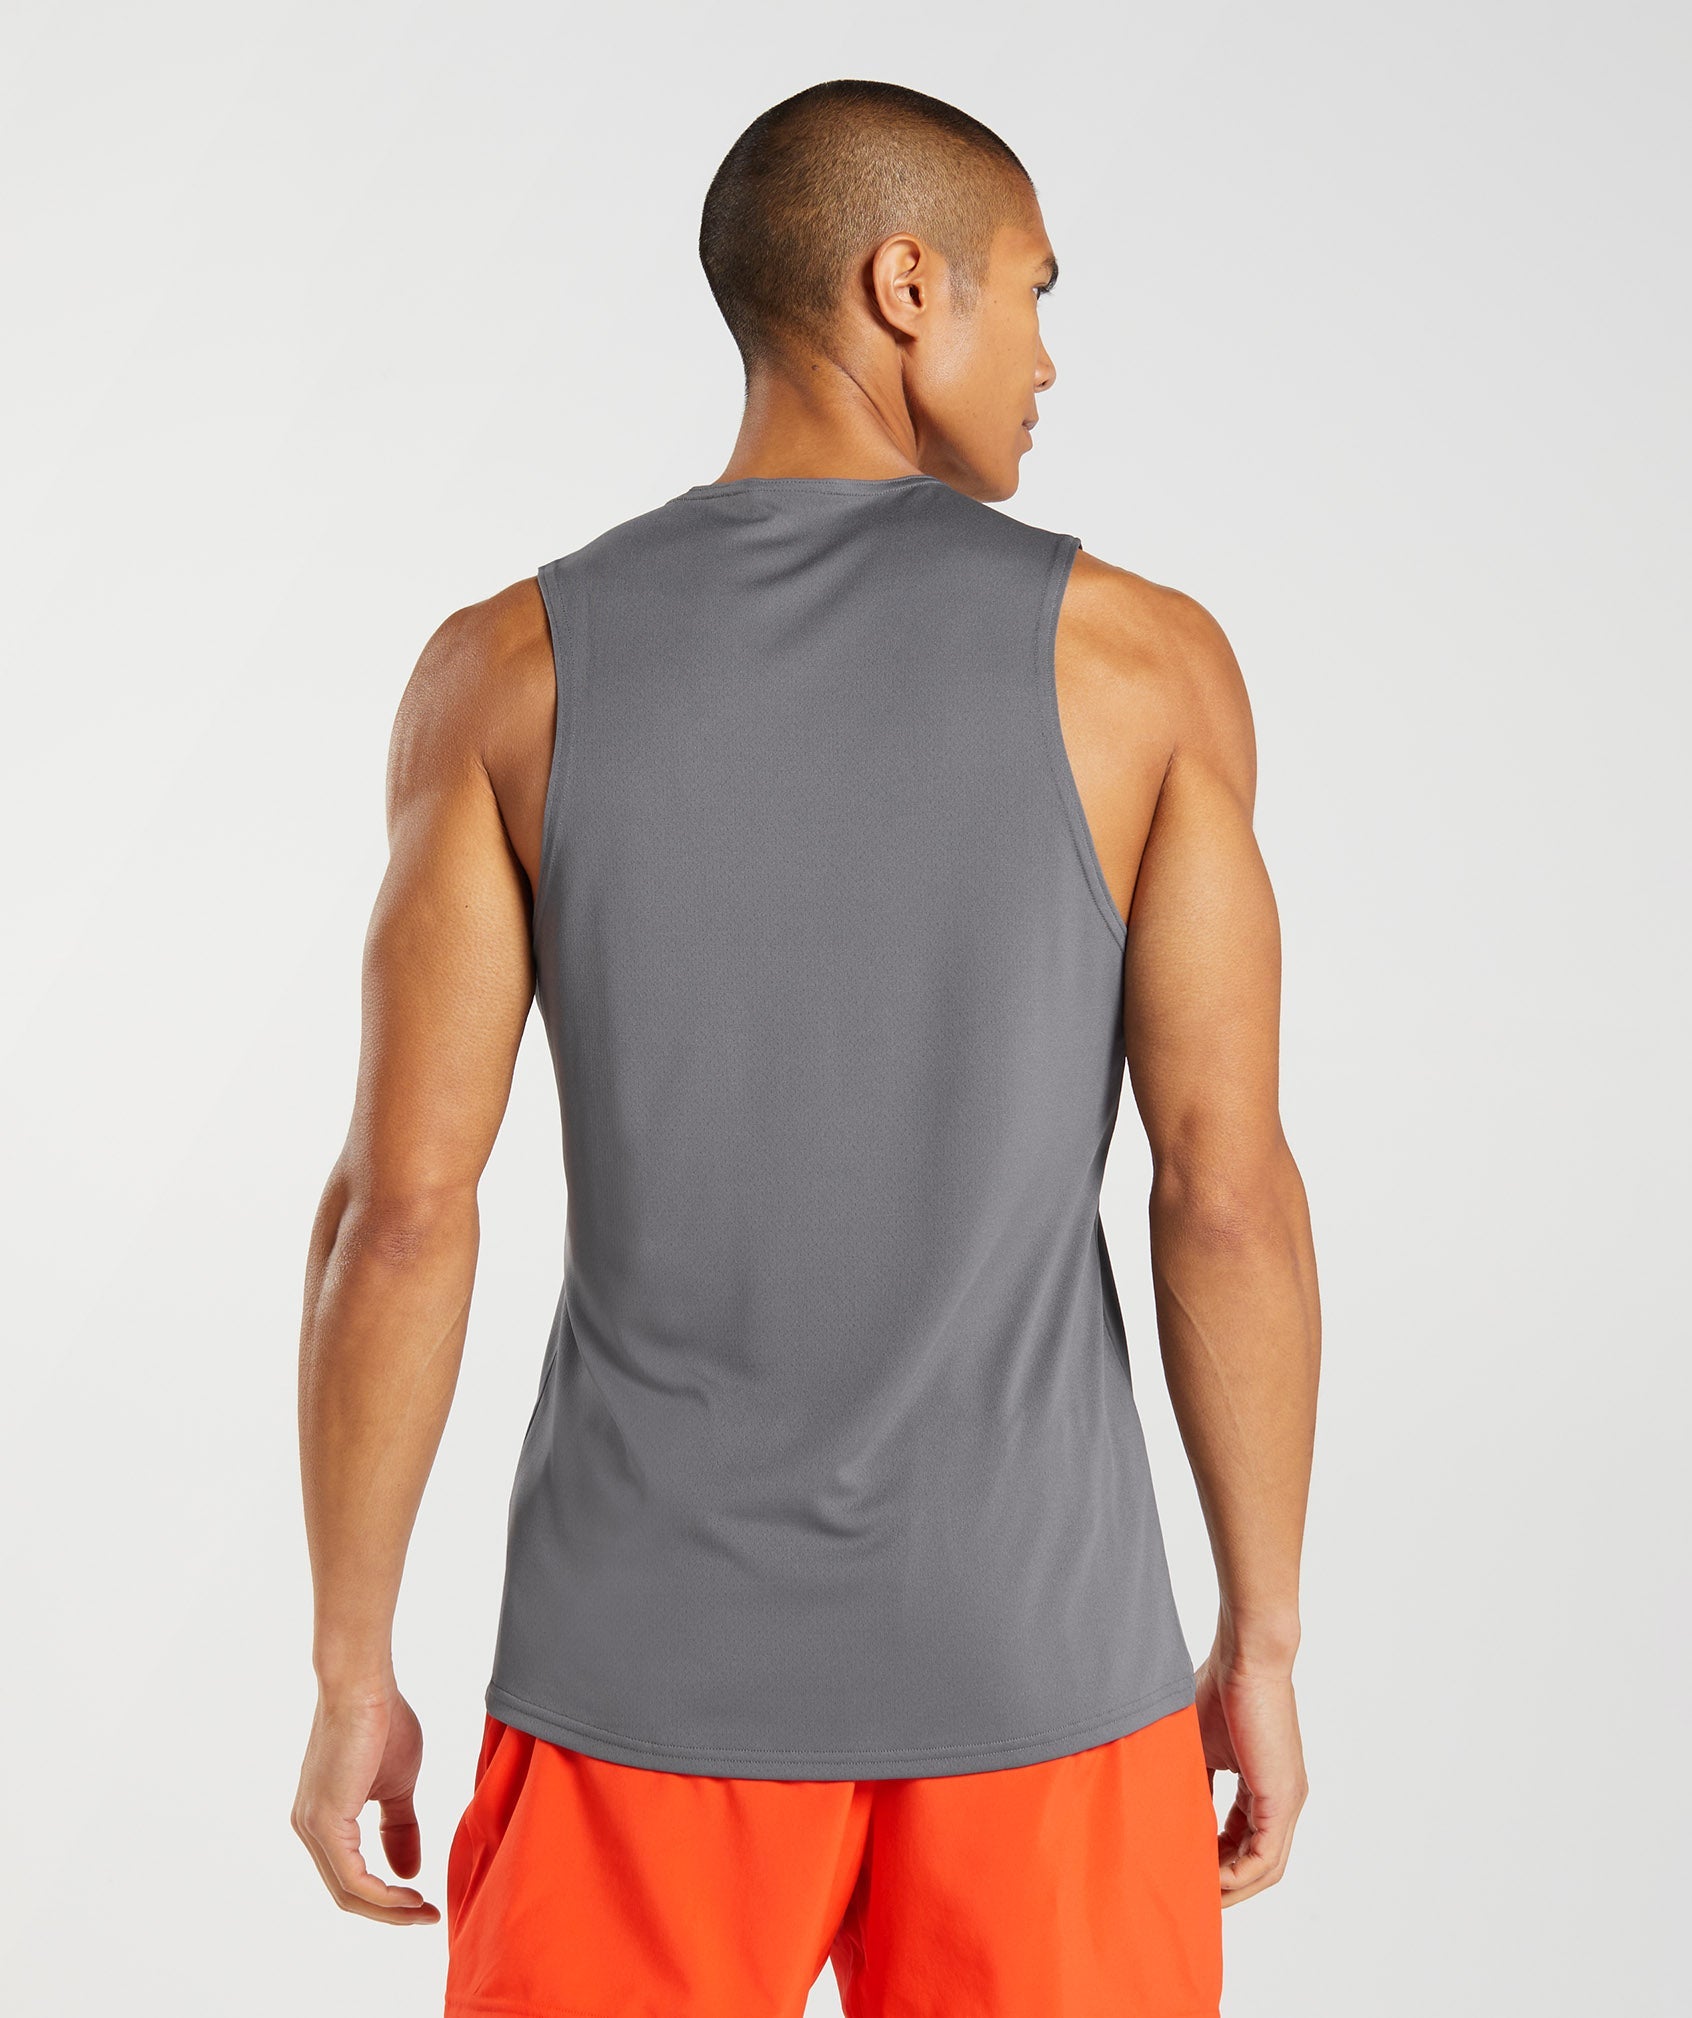 Arrival Tank in Silhouette Grey - view 2